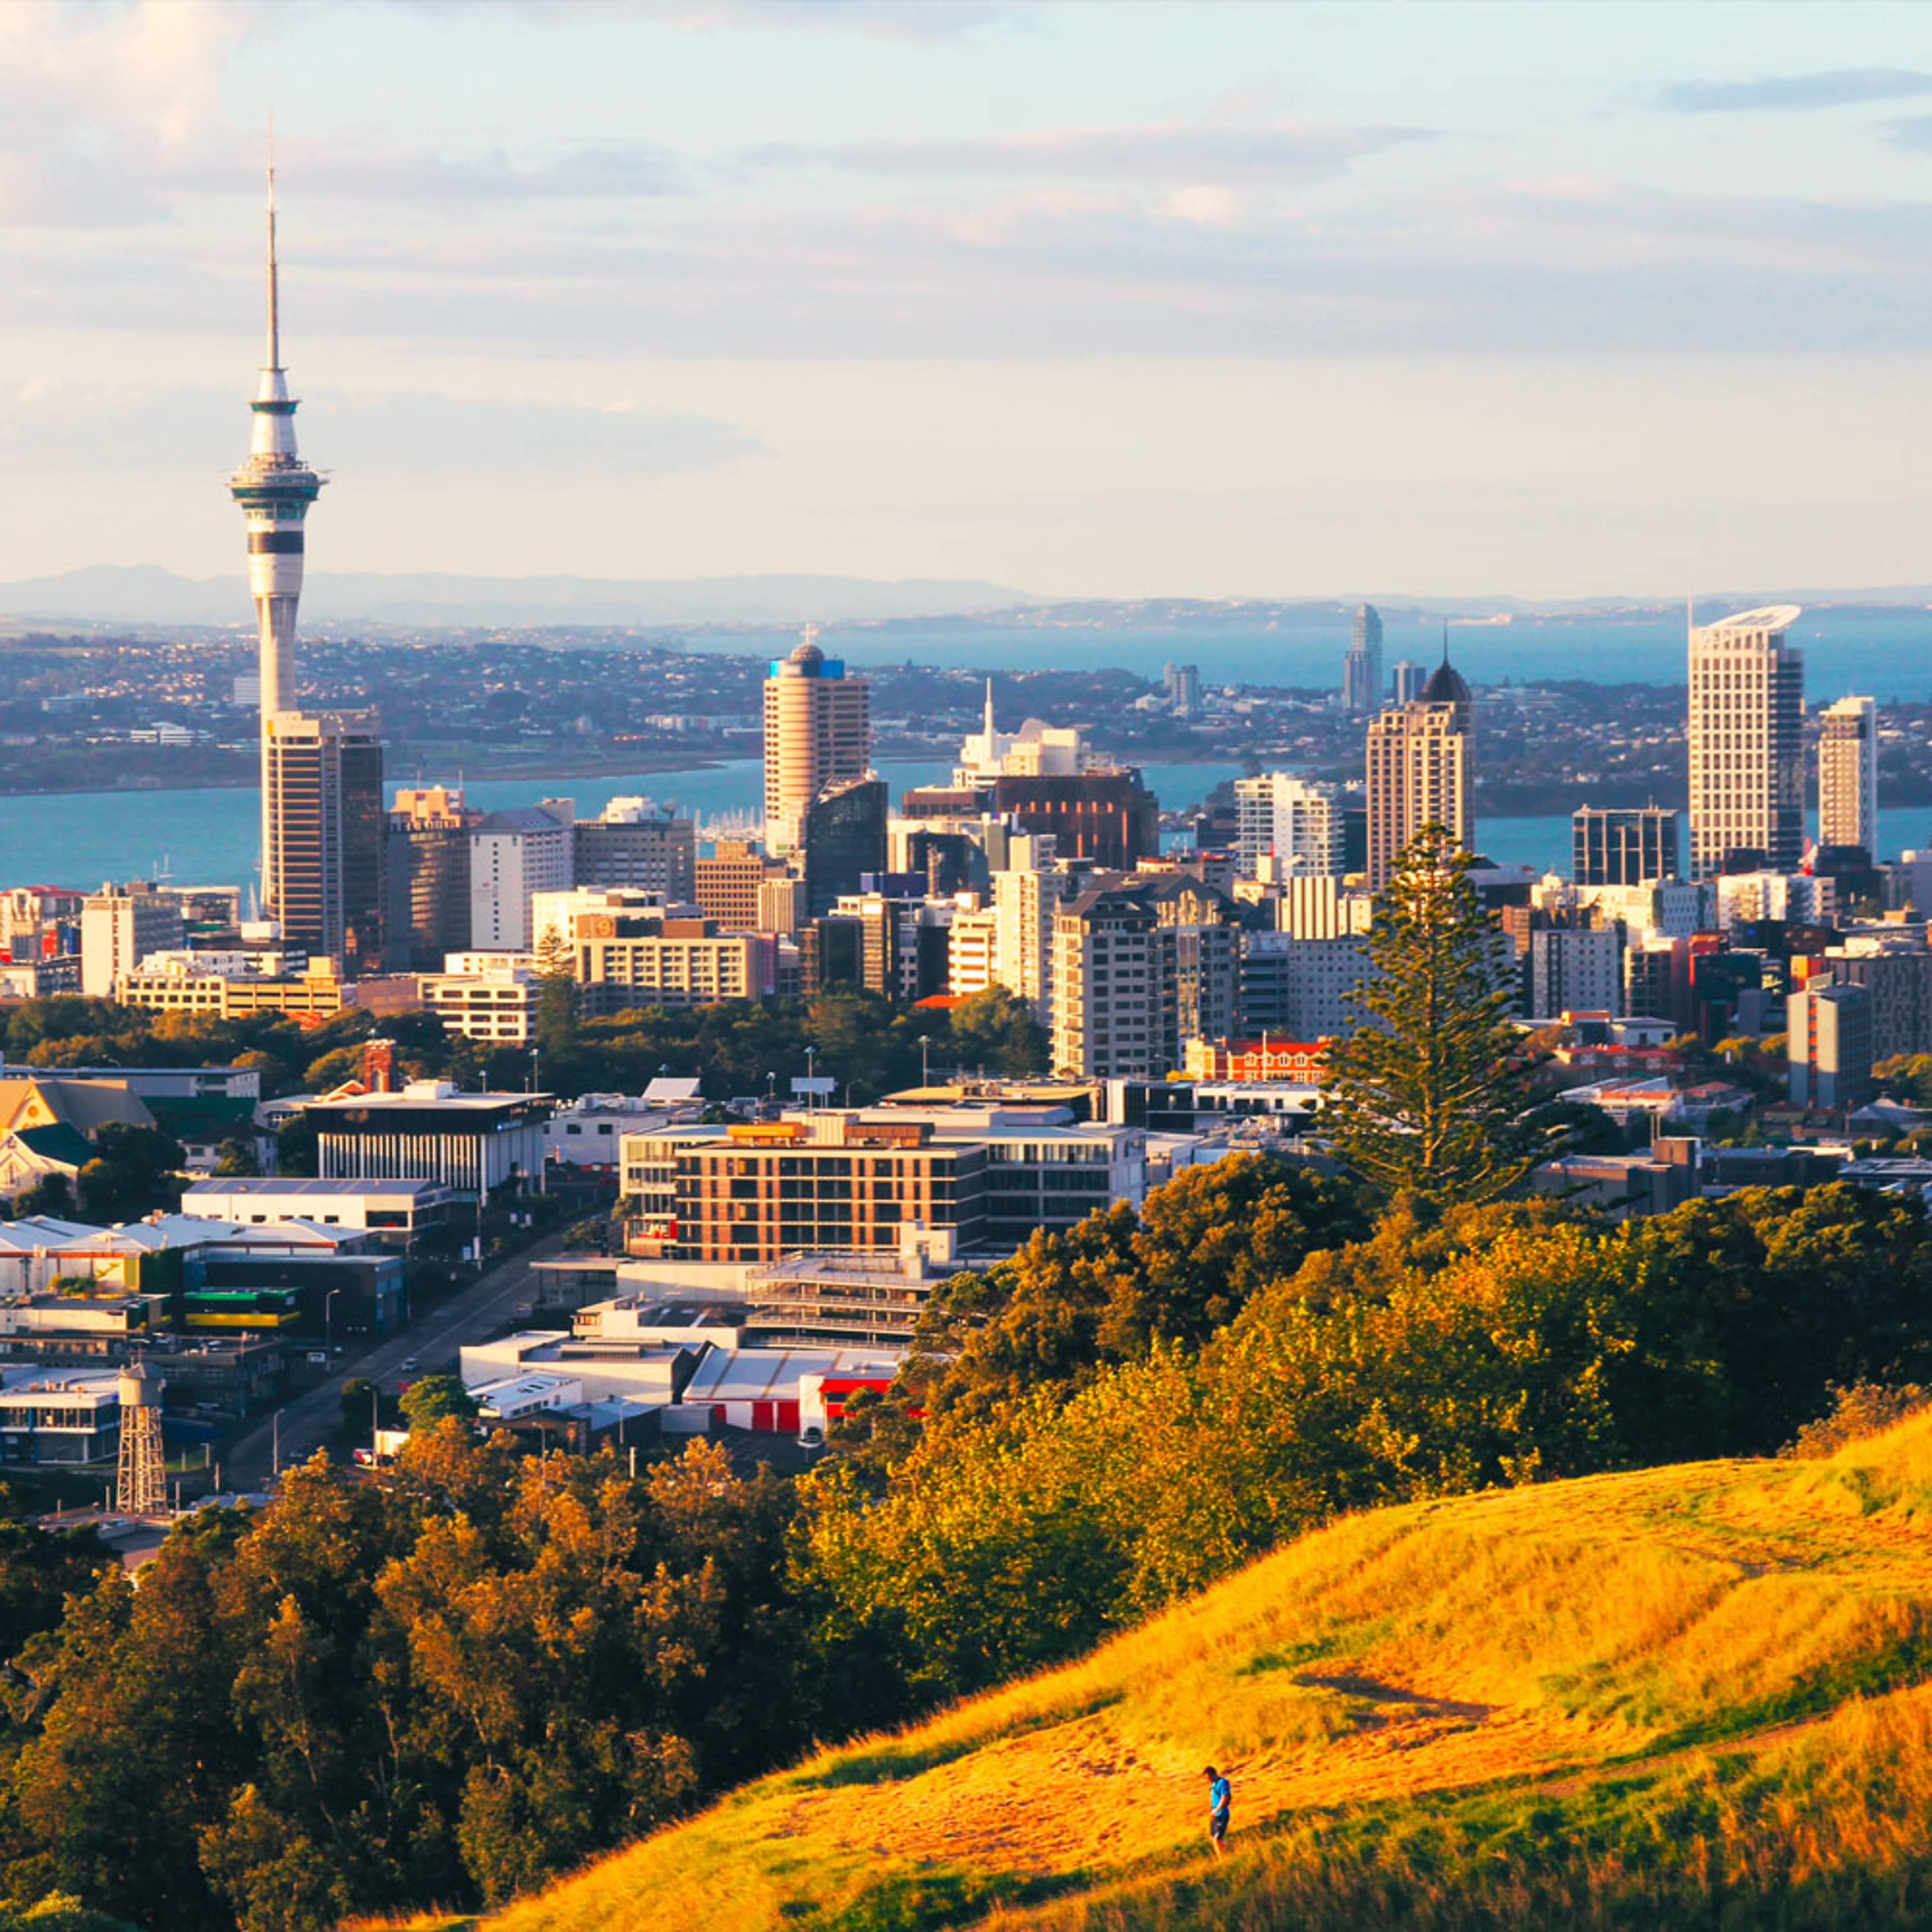 Design your perfect city tour with a local expert in New Zealand